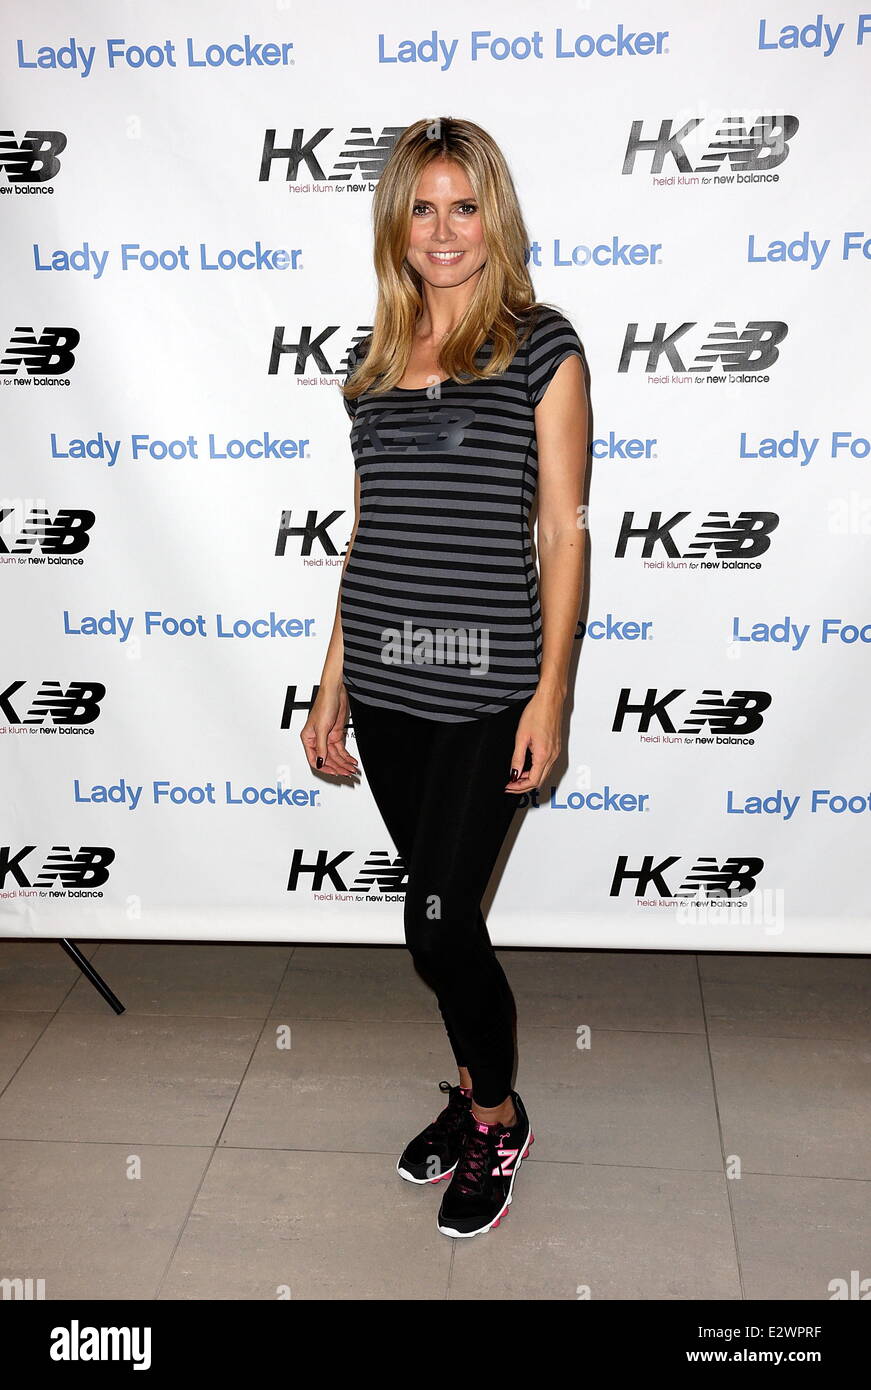 Heidi Klum Launches The New Heidi Klum For New Balance Collection At